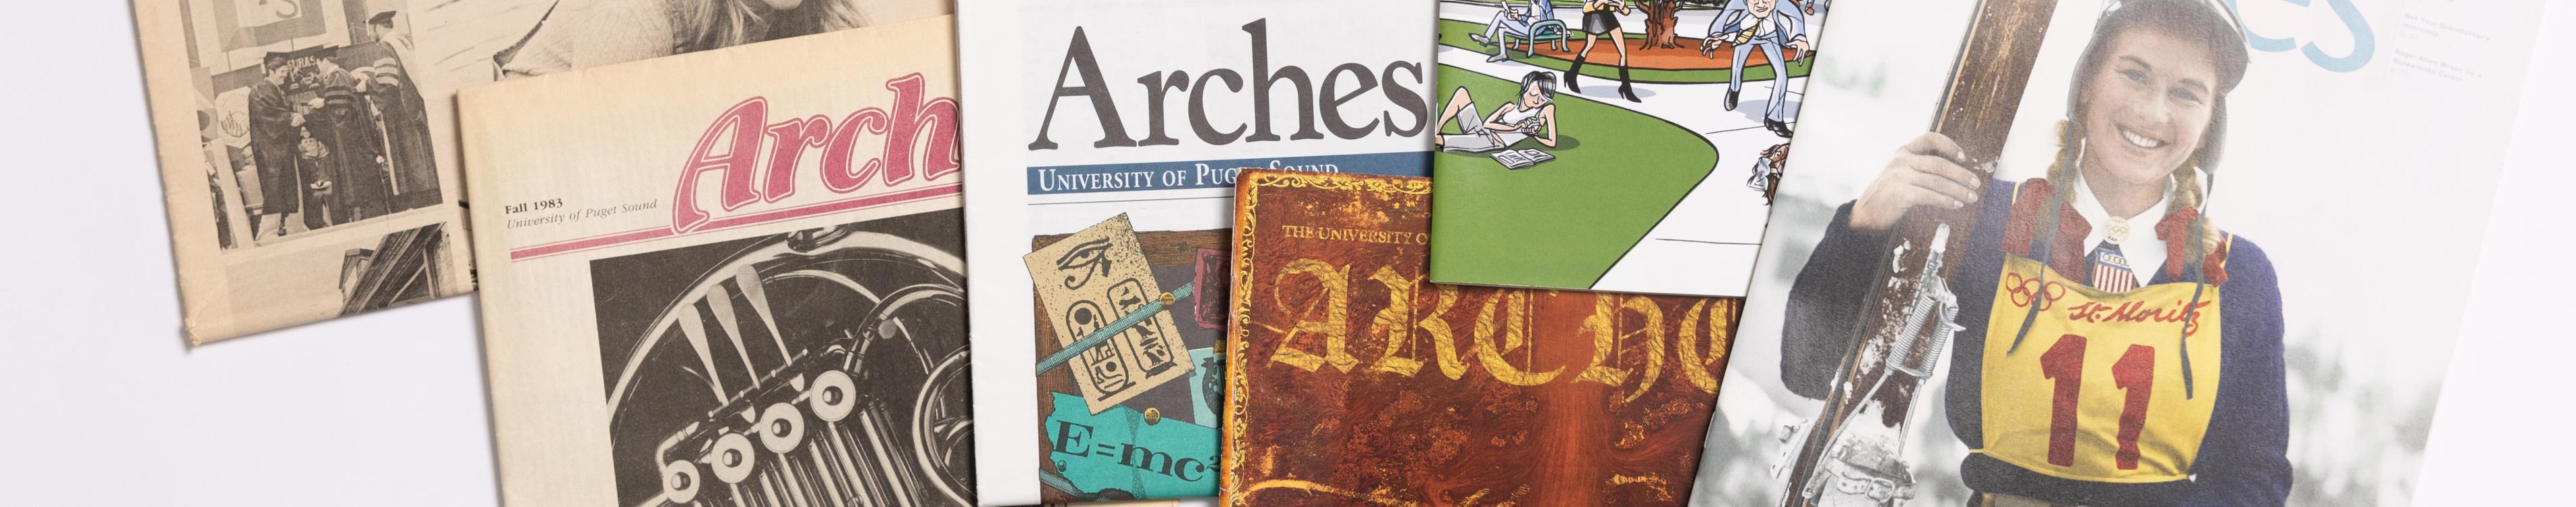 A selection of Arches covers, showcasing different designs from the 1970s to the 2020s.